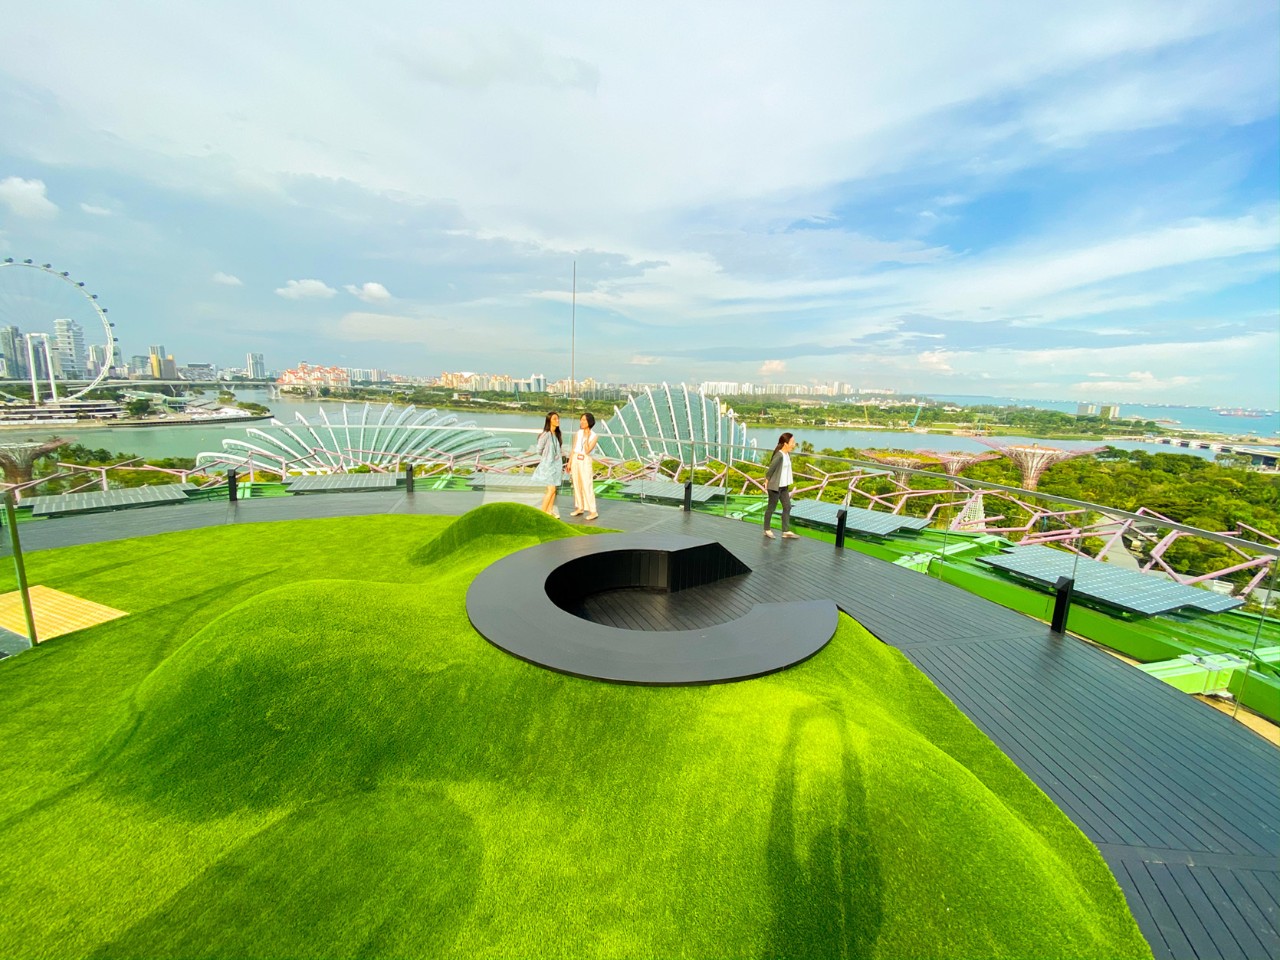 The view of Marina Bay from the open-air circular rooftop deck, which is the highest point in Gardens by the Bay.